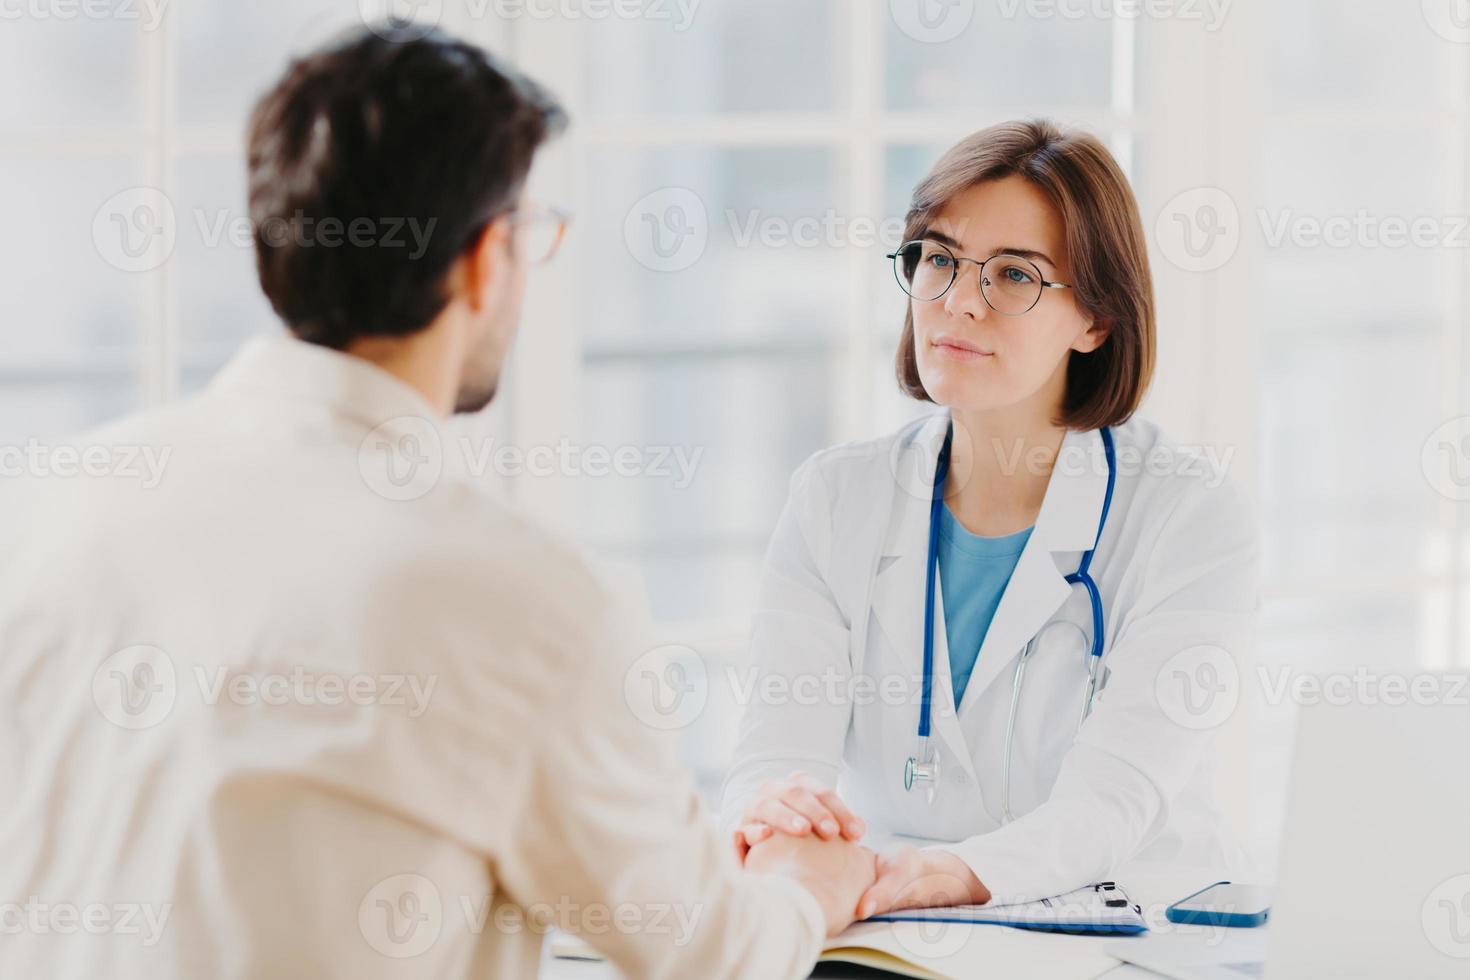 Friendly female doctor tries to support patient, holds his hands, gives useful consultation and explains medical information, makes diagnostic examining, pose in hospital room. Heathcare, assistance photo